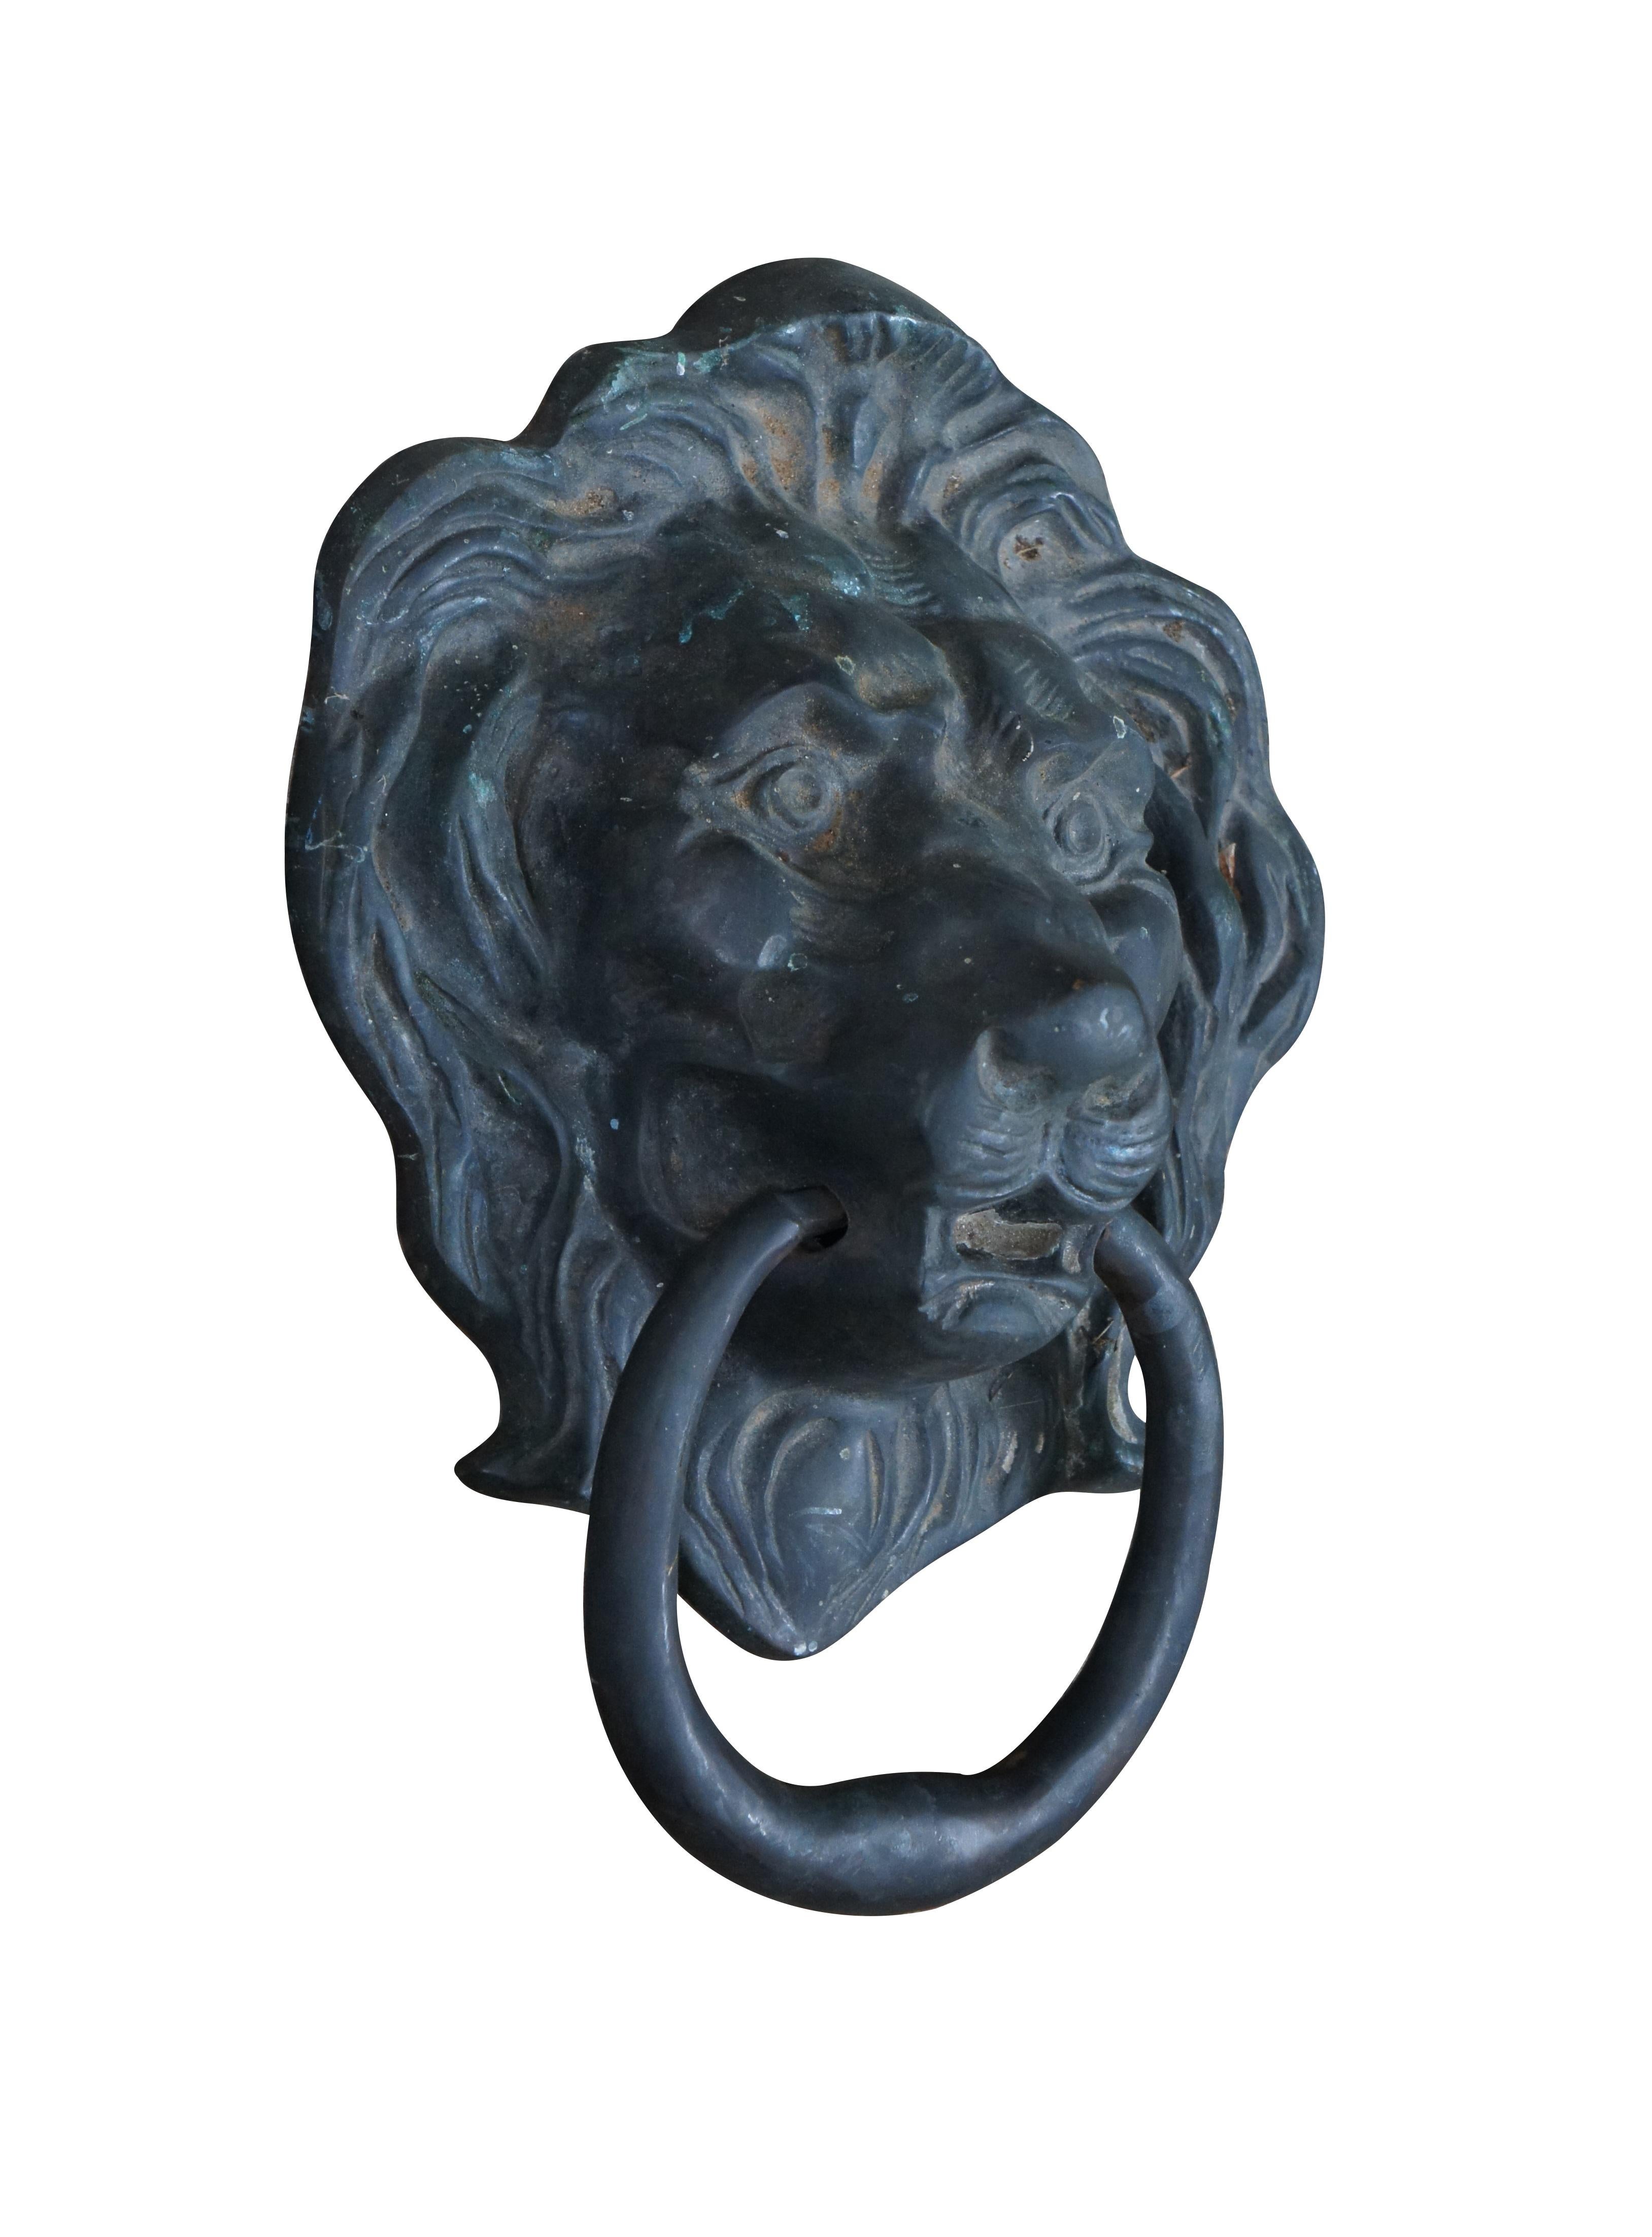 Antique Georgian solid brass door knocker in the traditional shape of a lion's head with a ring in it's mouth. 

Dimensions:
8